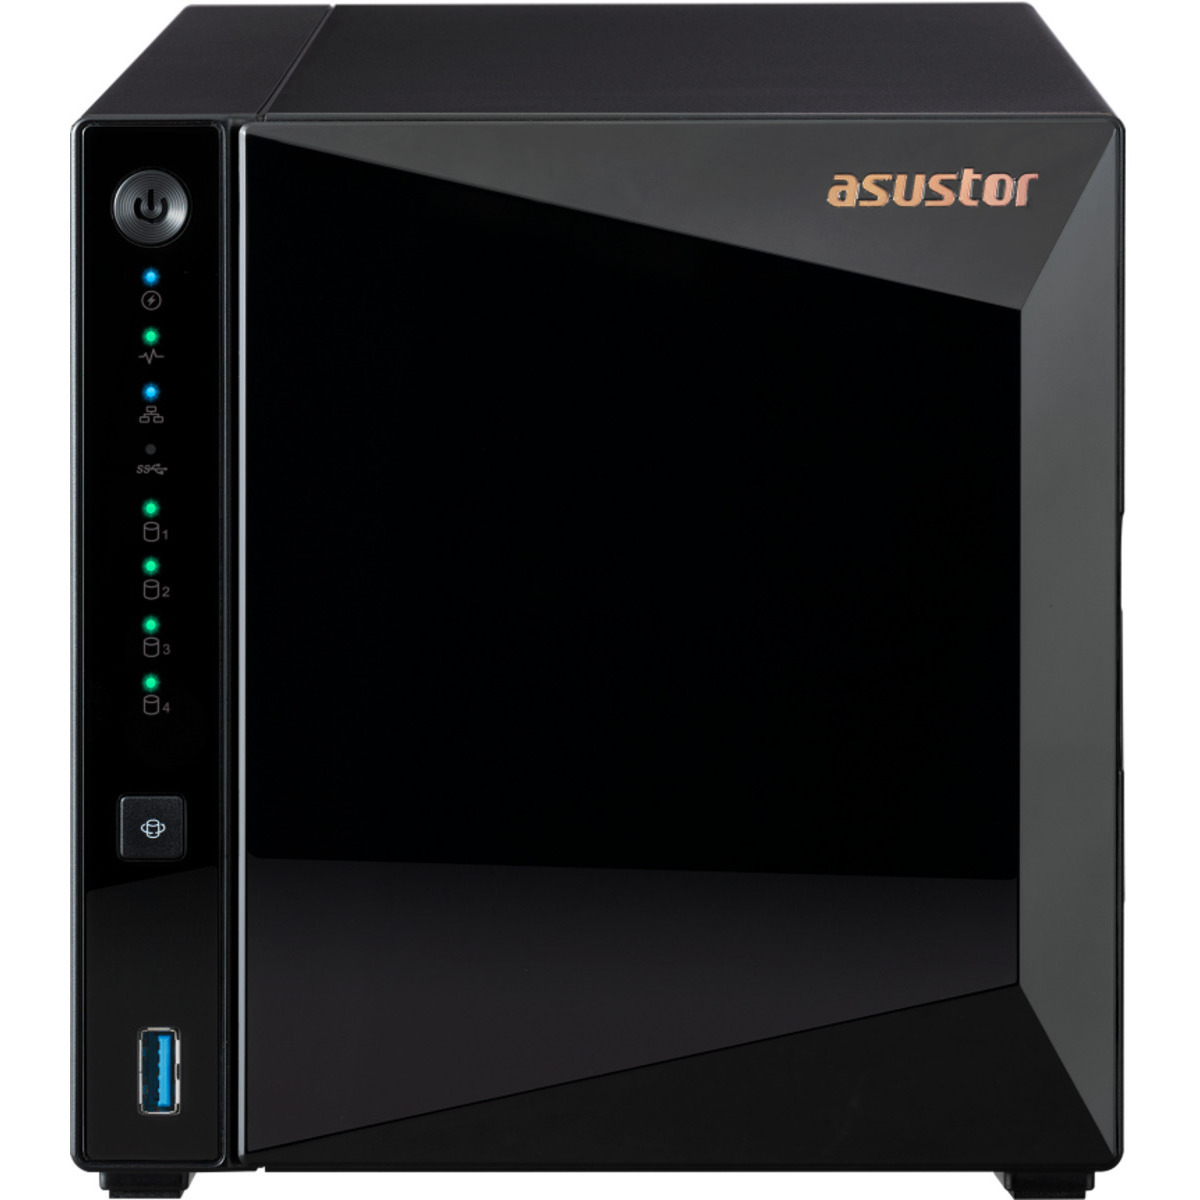 ASUSTOR DRIVESTOR 4 Pro Gen2 AS3304T v2 48tb 4-Bay Desktop Personal / Basic Home / Small Office NAS - Network Attached Storage Device 3x16tb Seagate EXOS X18 ST16000NM000J 3.5 7200rpm SATA 6Gb/s HDD ENTERPRISE Class Drives Installed - Burn-In Tested - ON SALE DRIVESTOR 4 Pro Gen2 AS3304T v2